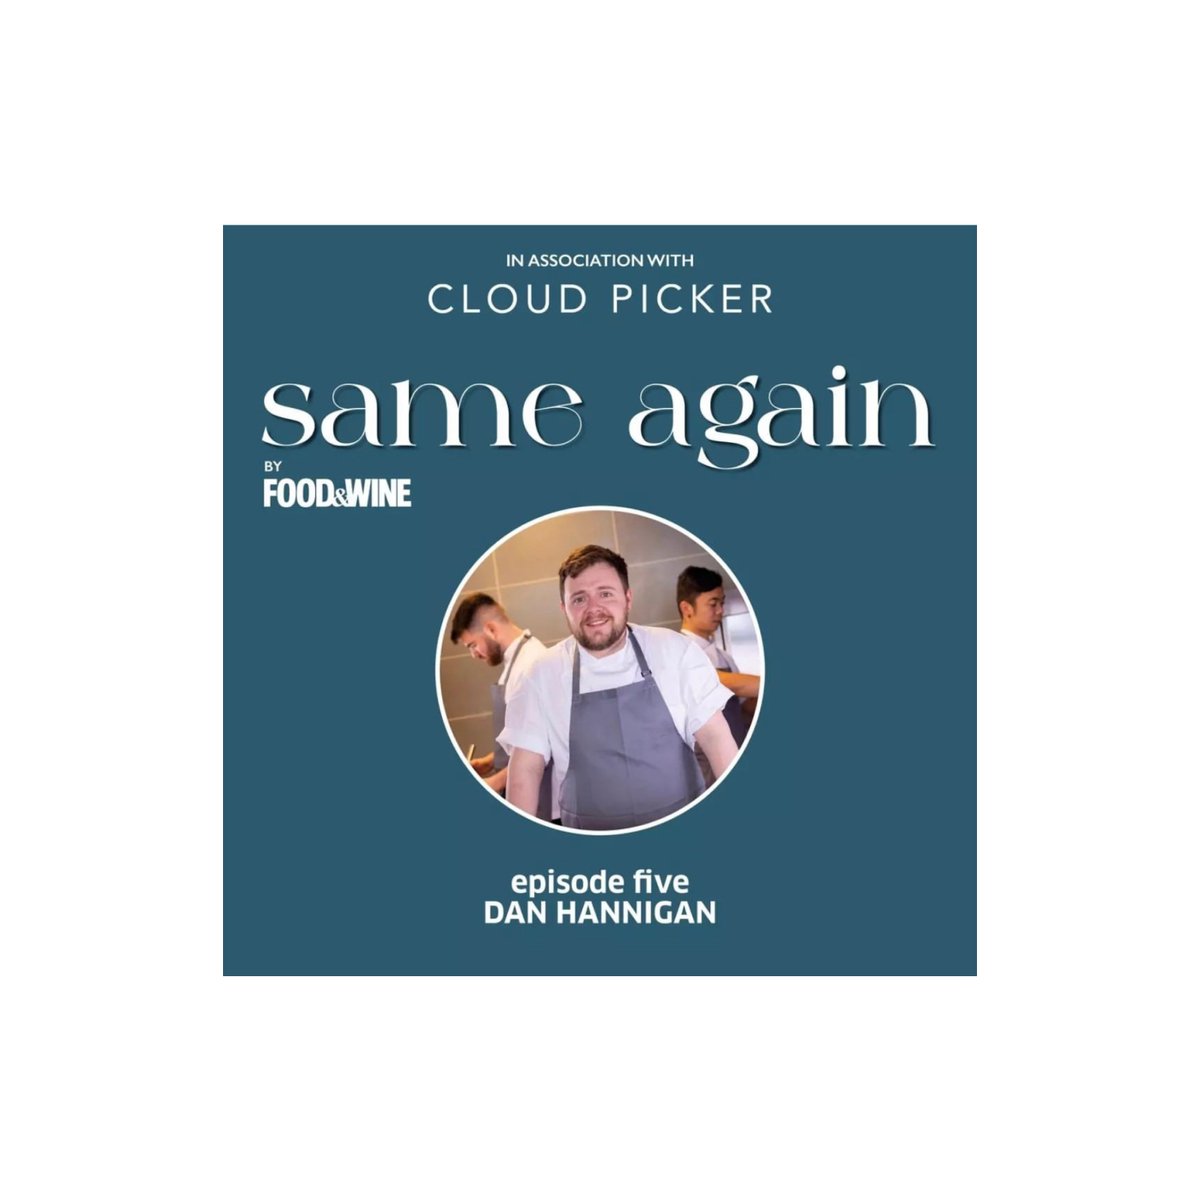 S A M E 
.
.
Episode 5 from Food & Wine Ireland is now out on Spotify and Apple Podcasts, proudly sponsored by yours truly! 

This episode features Young Chef of the Year Dan Hannigan from Orwell Road Restaraunt.

#Foodandwineireland
#Podcast
#Foodpodcasts